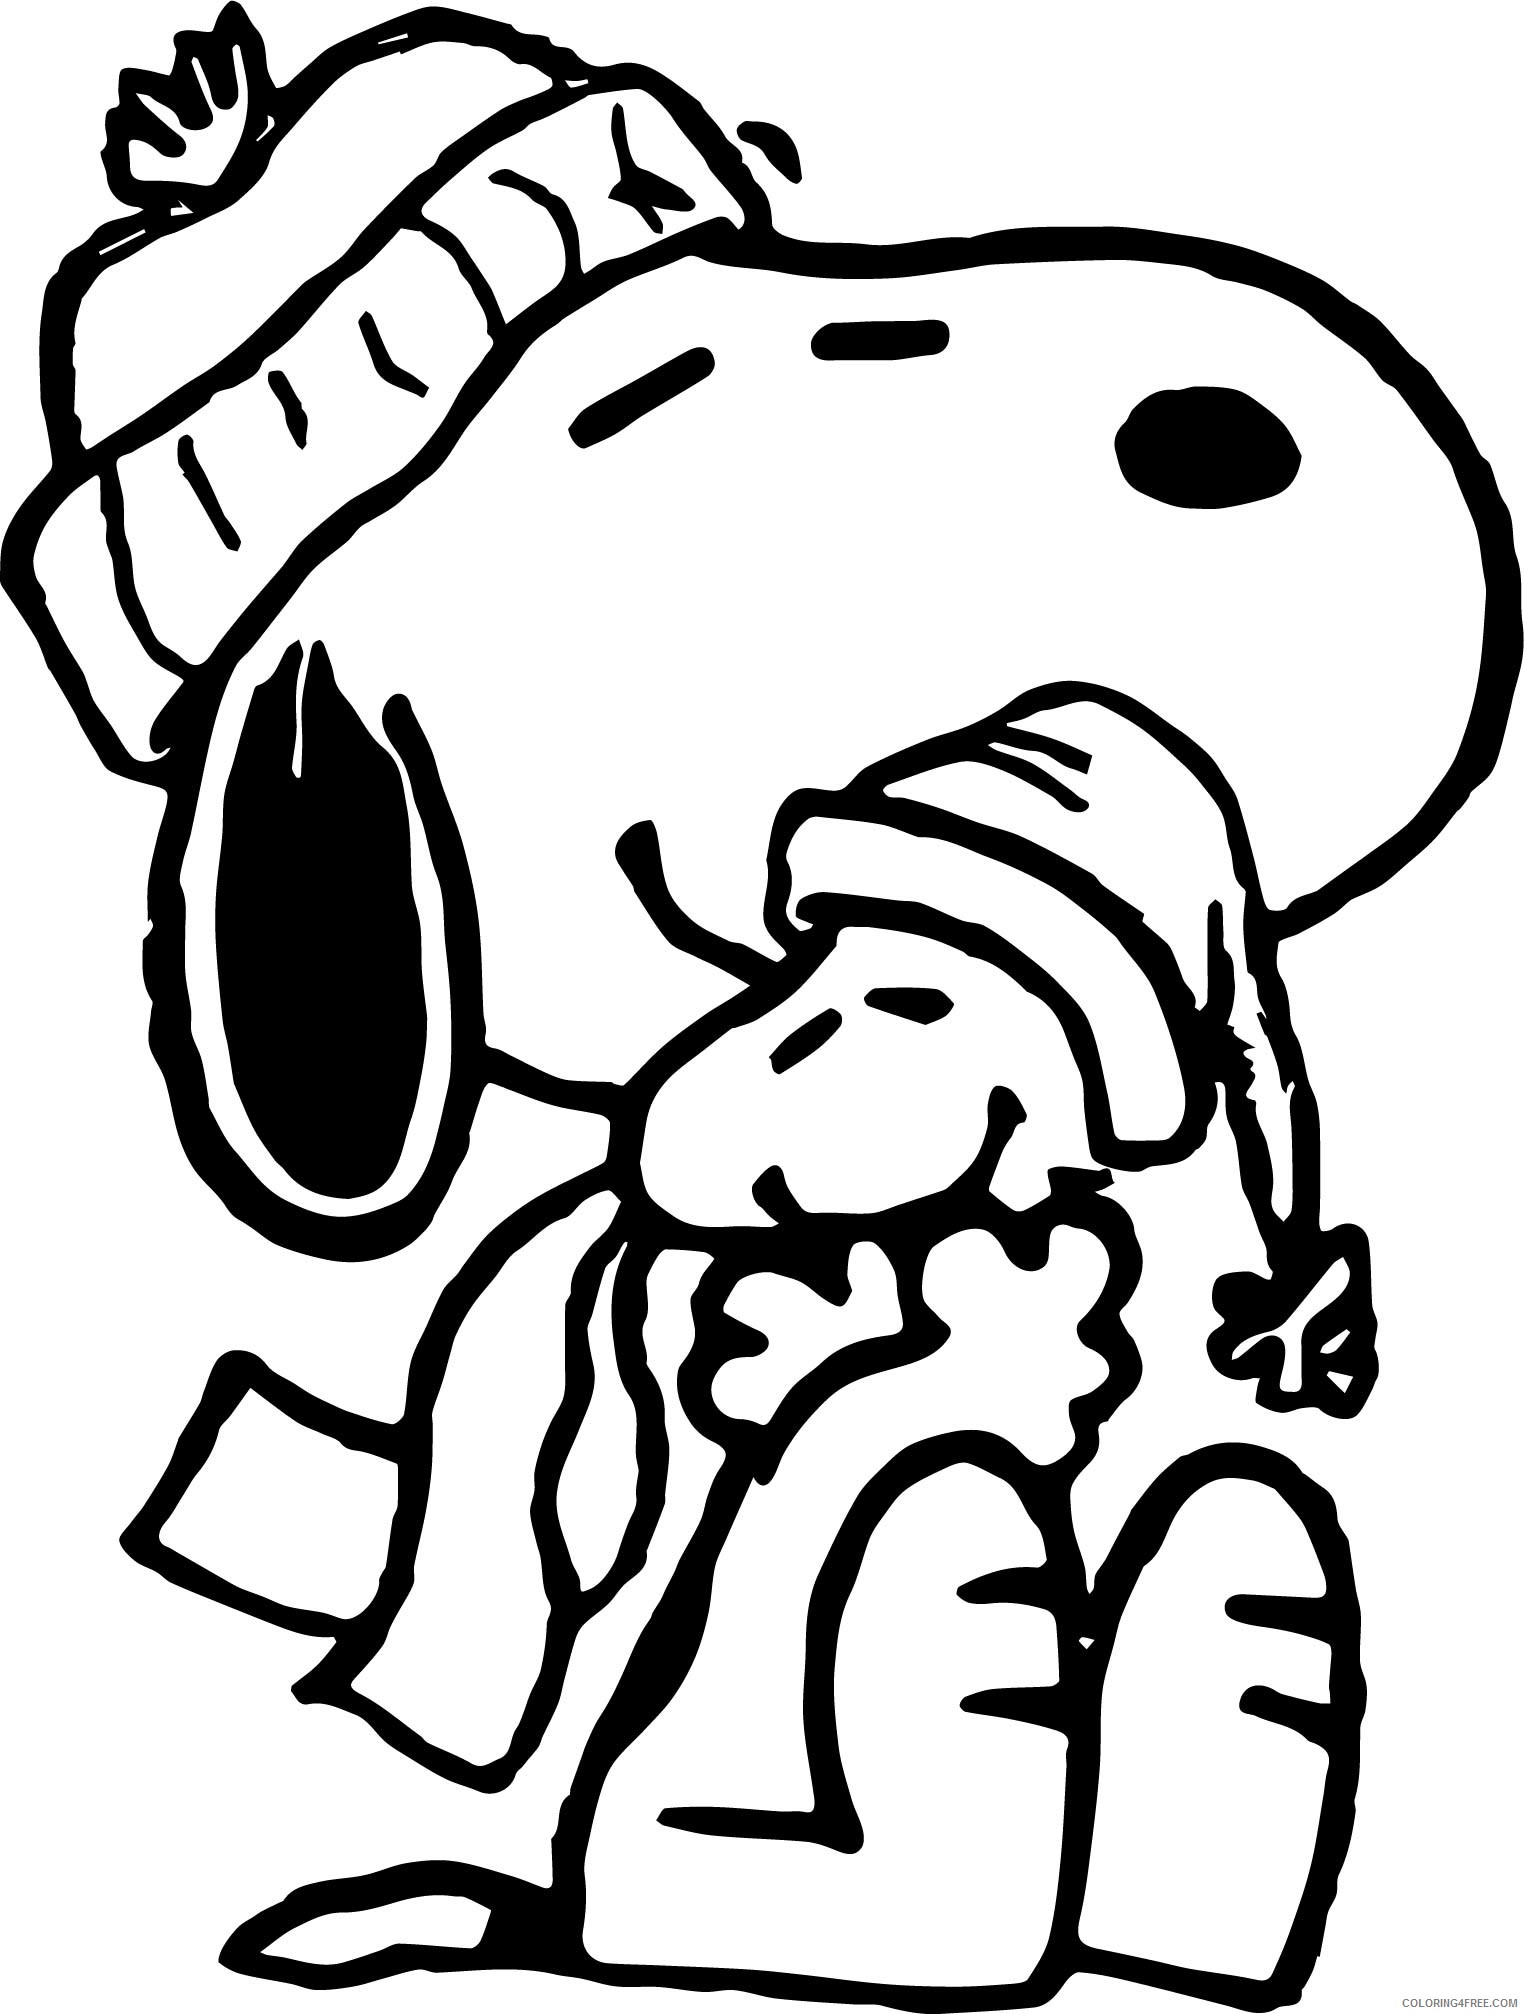 Snoopy Coloring Pages Cartoons Snoopy and Woodstock Printable 2020 5652 Coloring4free